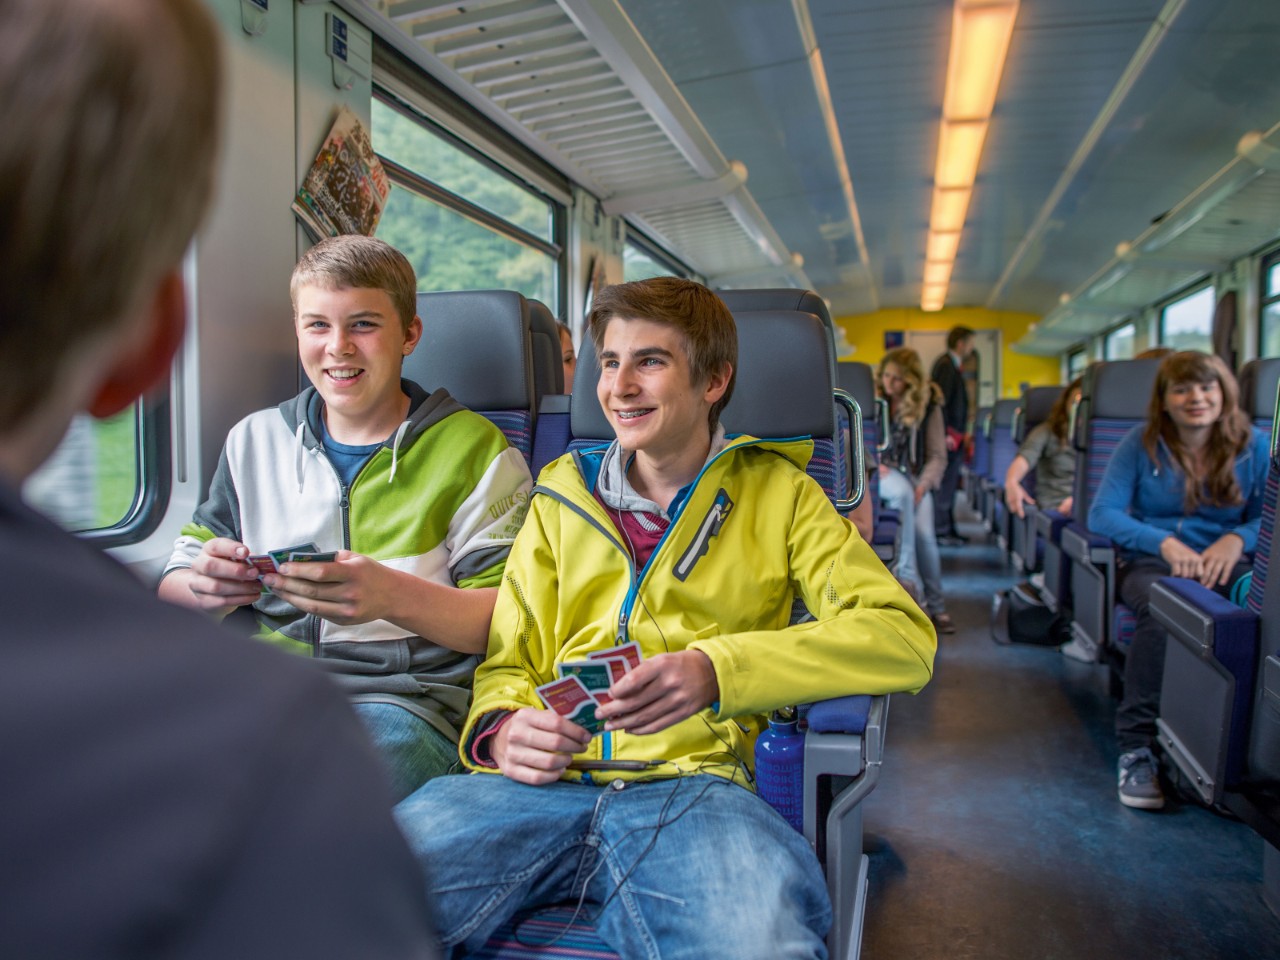 School students travelling on a special event train.